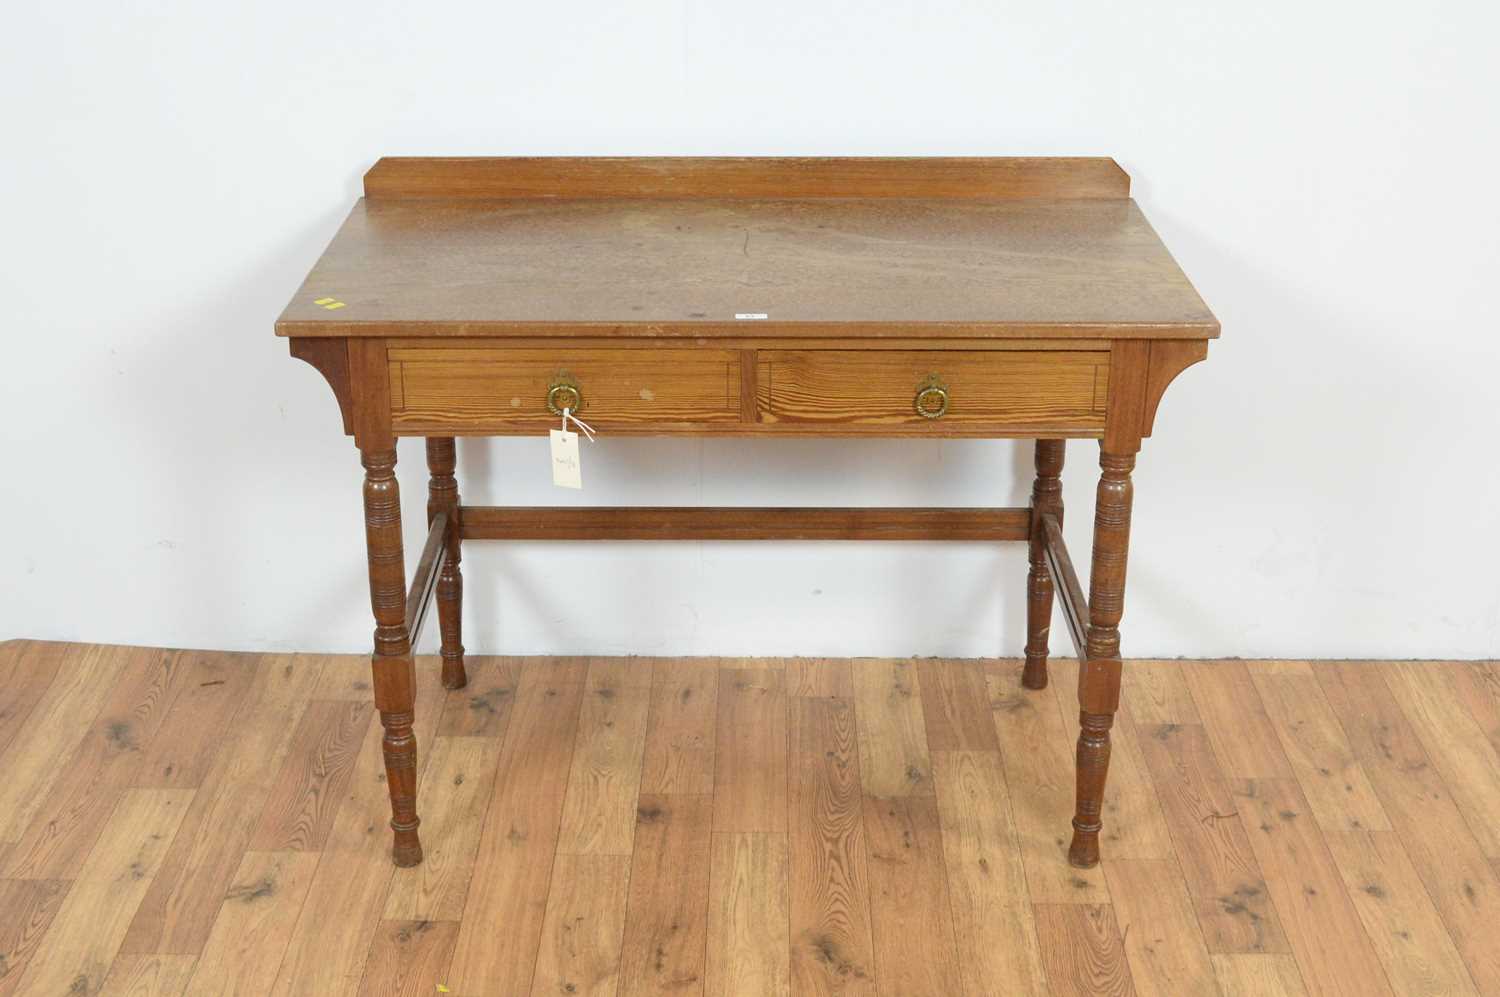 Gregory & Co, Regent St, London; An Arts and Crafts walnut and simulated pine washstand - Image 2 of 4